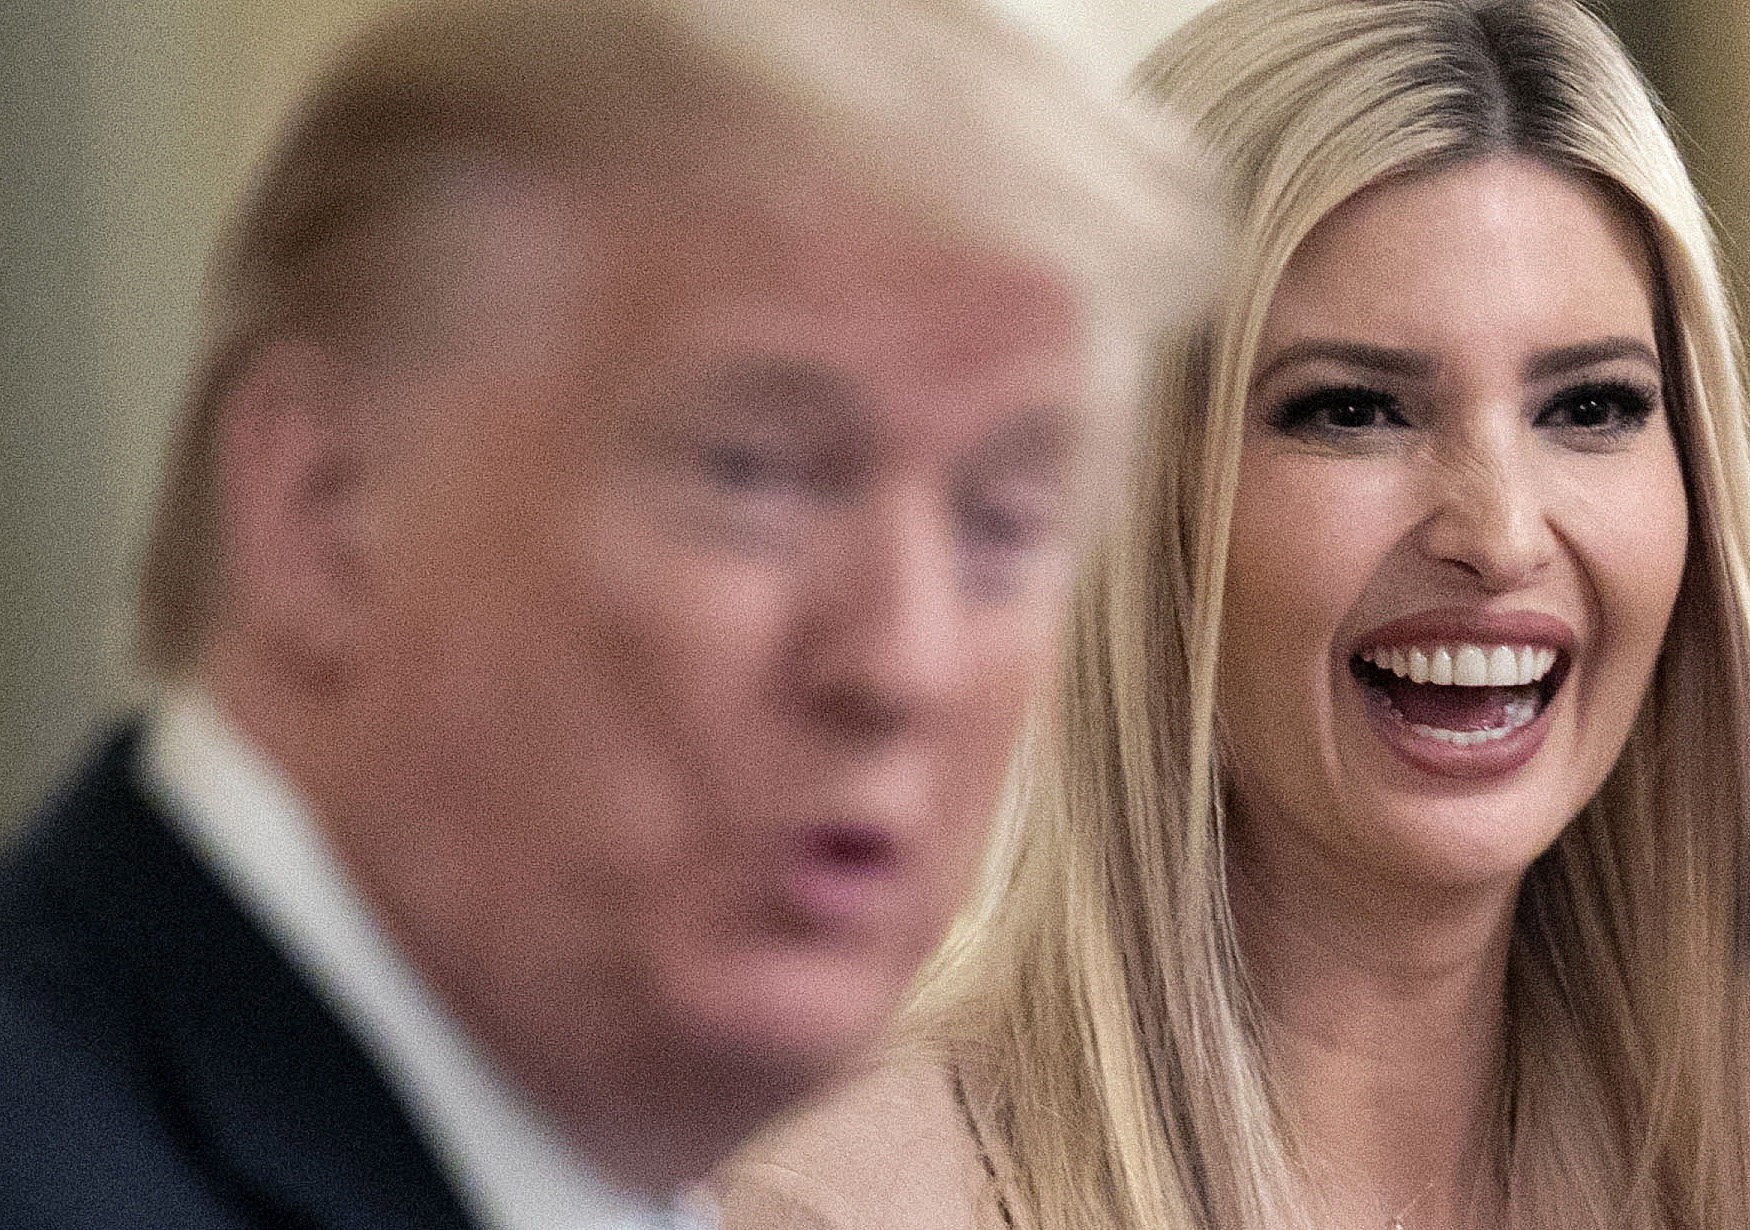 Donald Trump has often leapt to his daughter Ivanka’s defence. Photo: Getty Images